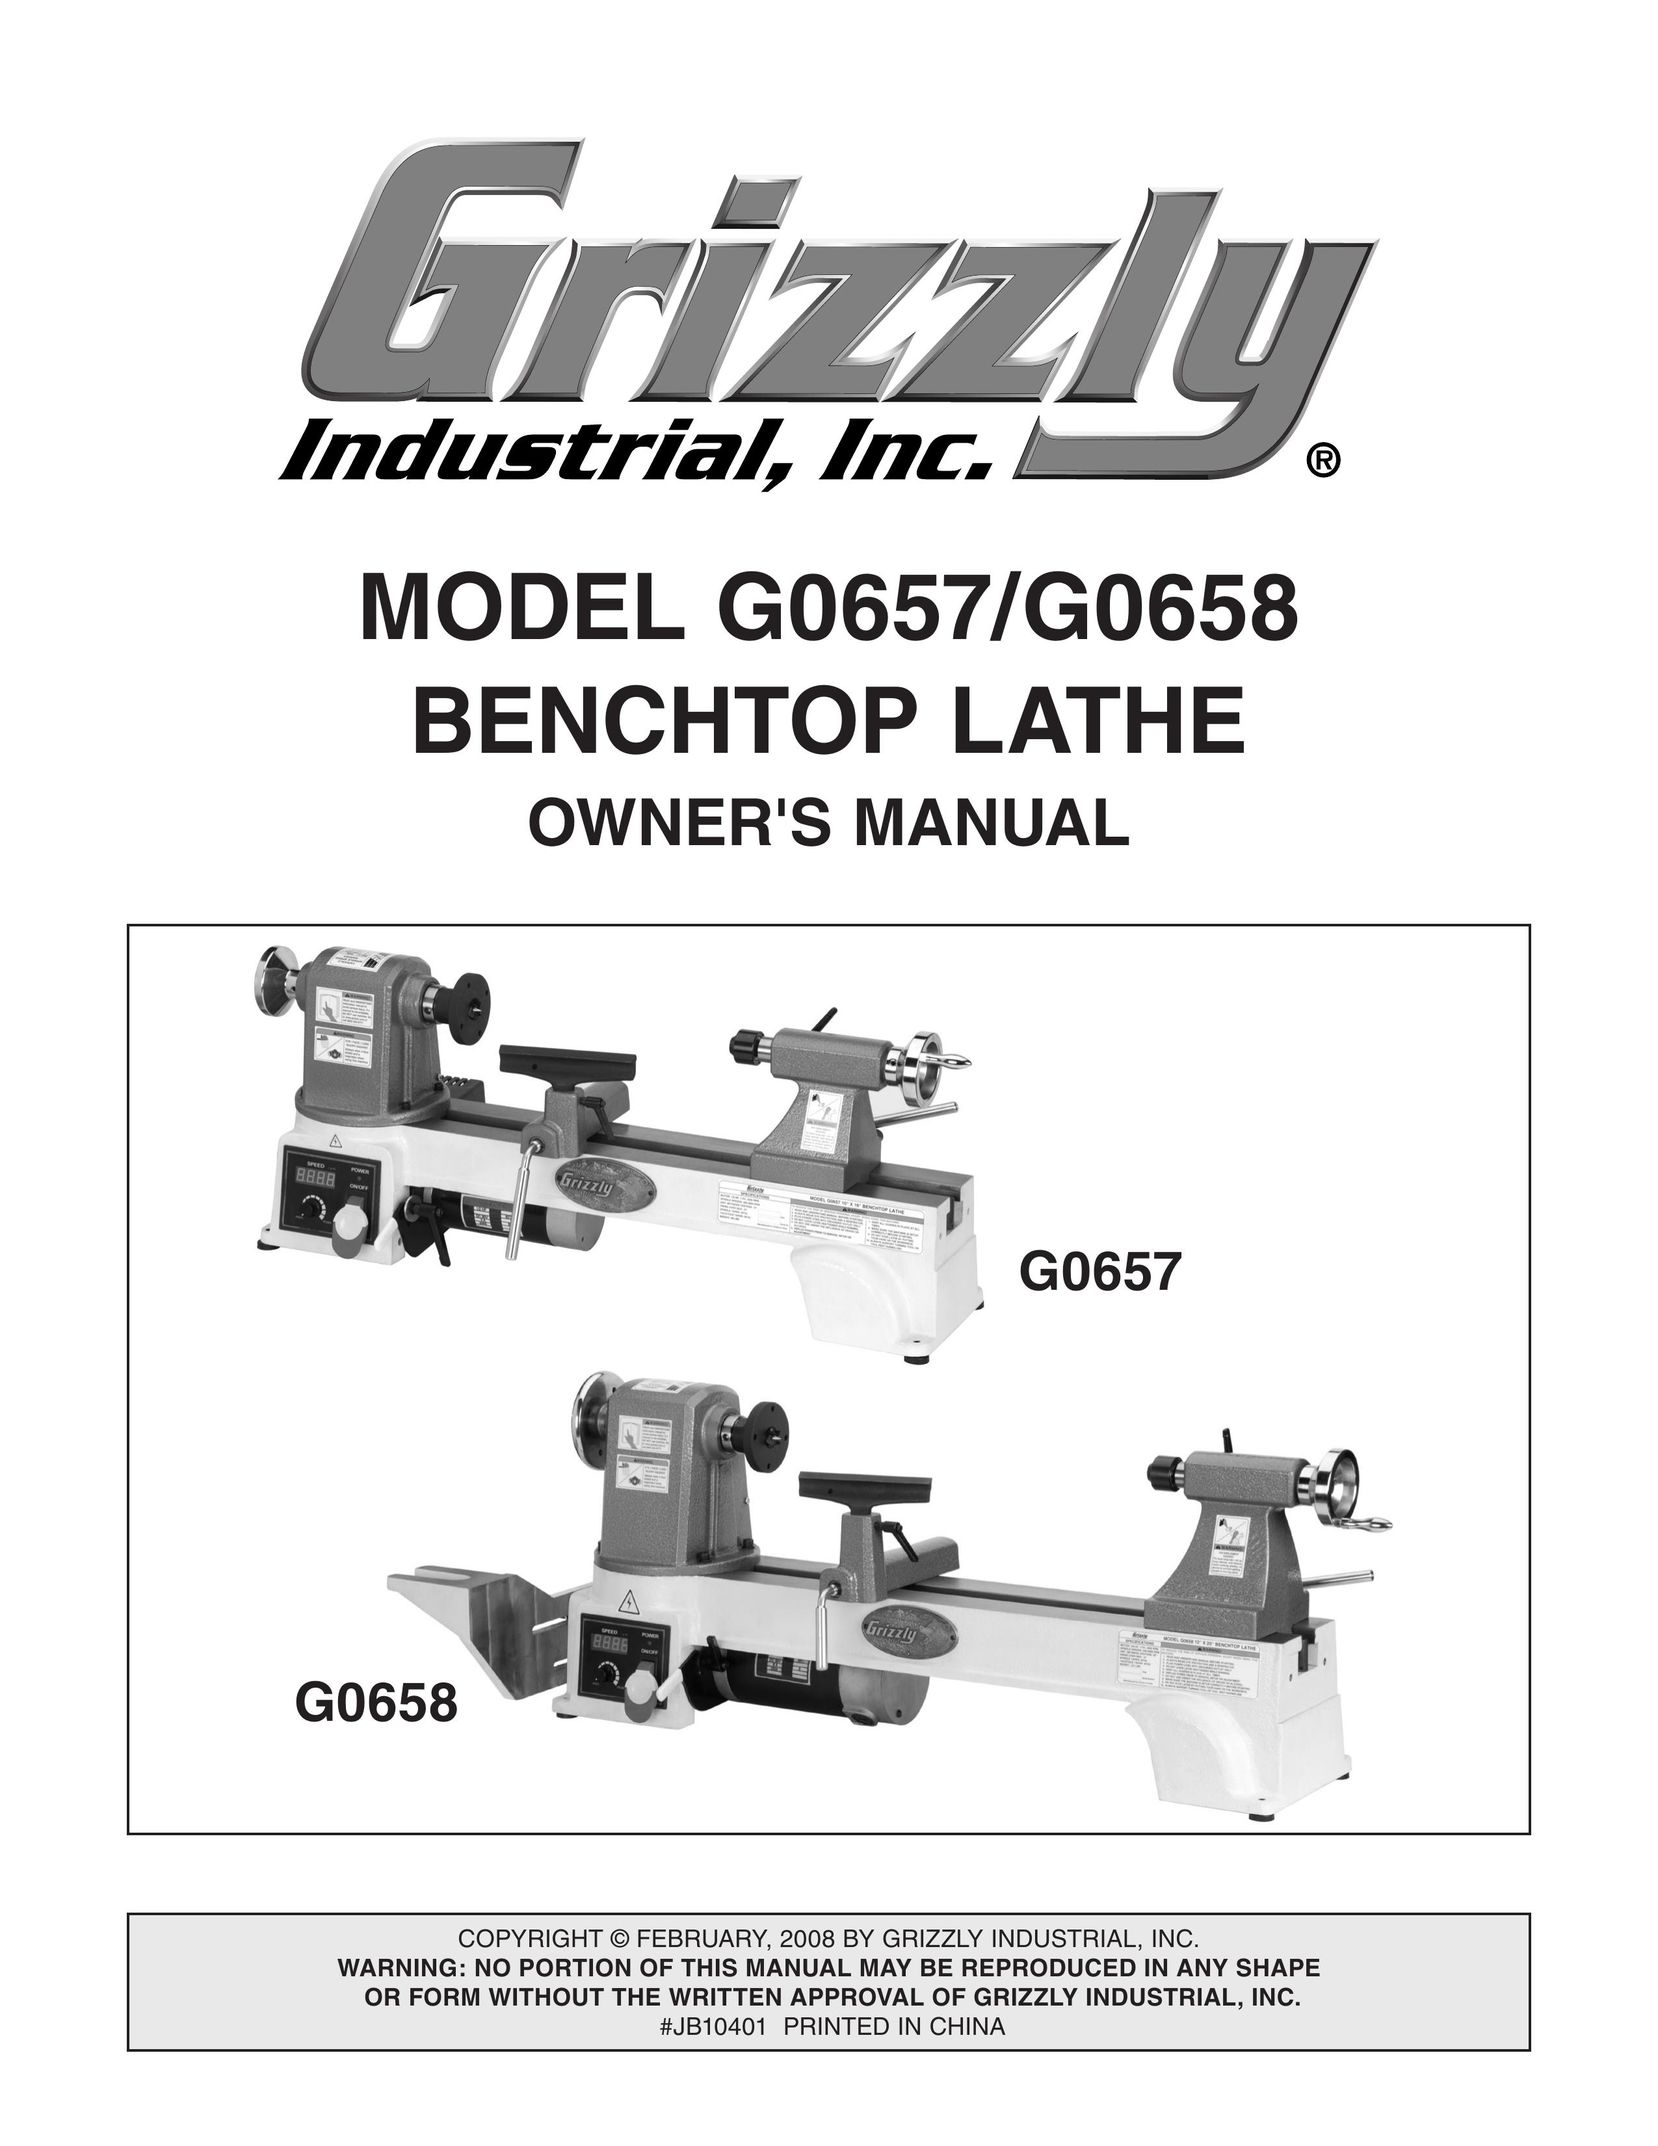 Grizzly G0657 Lathe User Manual